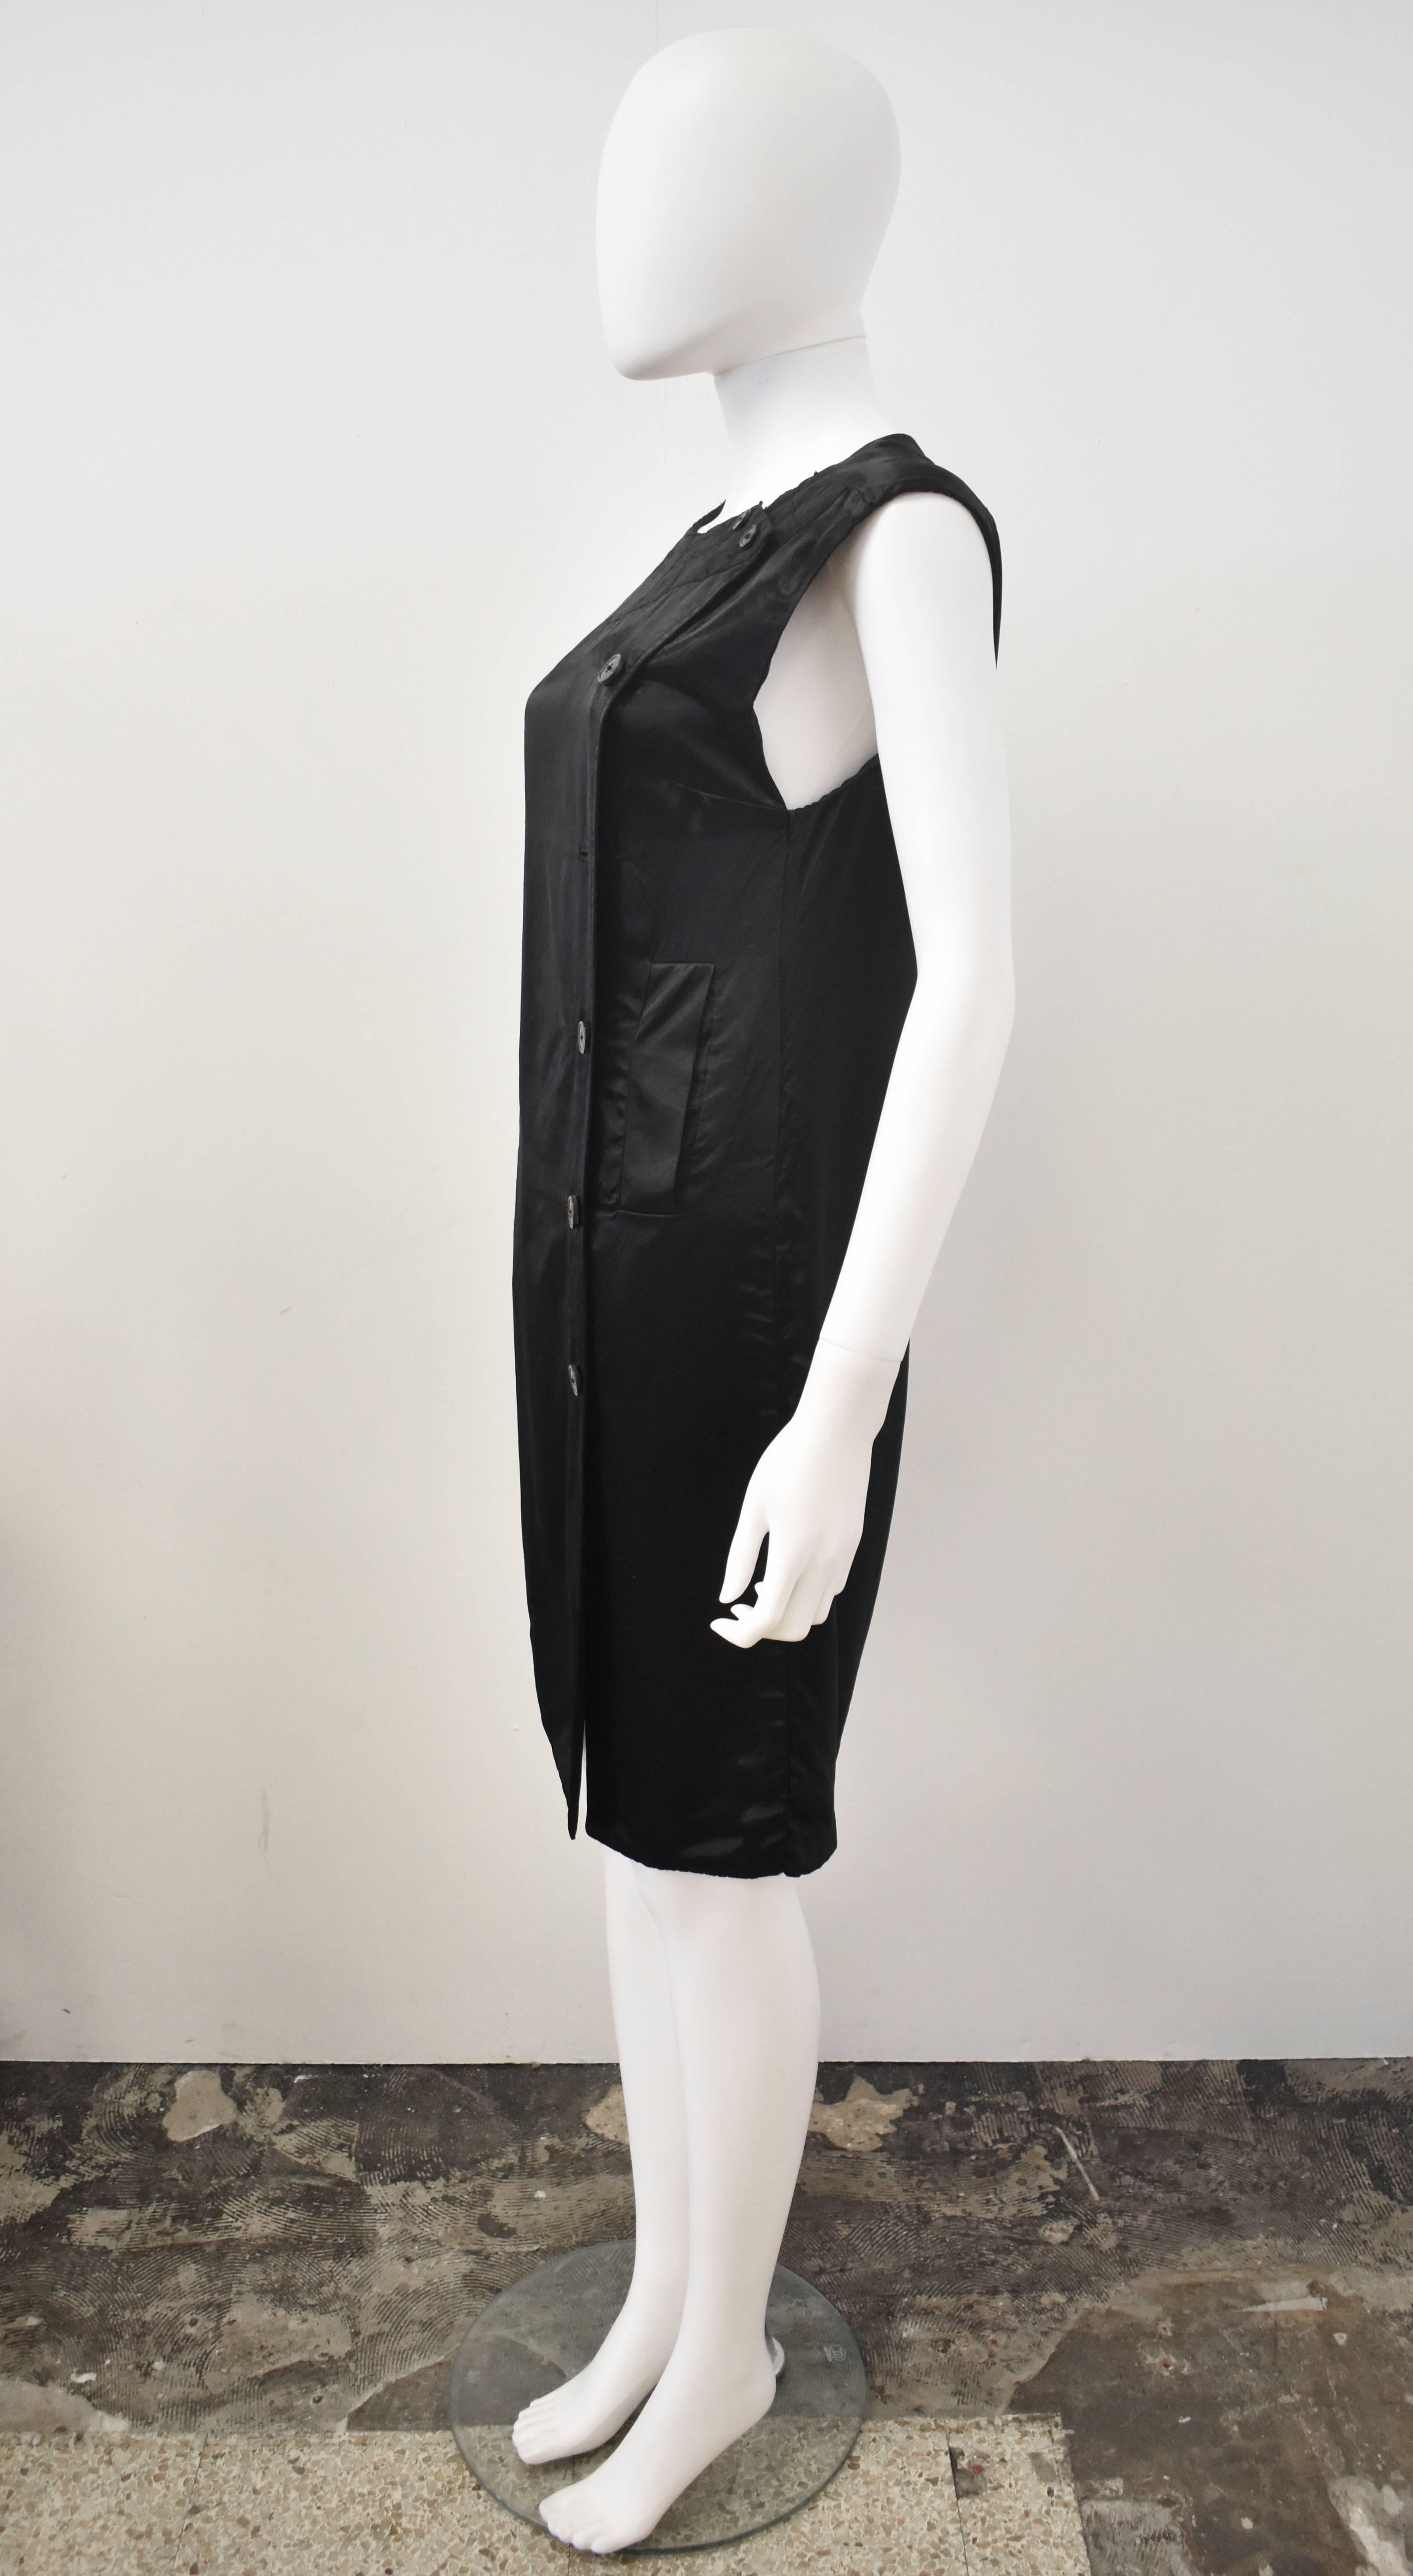 A black dress with button closure to the side, two side slant pockets, and a round textured collar by Dries Van Noten. Made of a light, shiny viscose-like fabric. This a sample piece; it does not feature a care label. A button is missing but it does